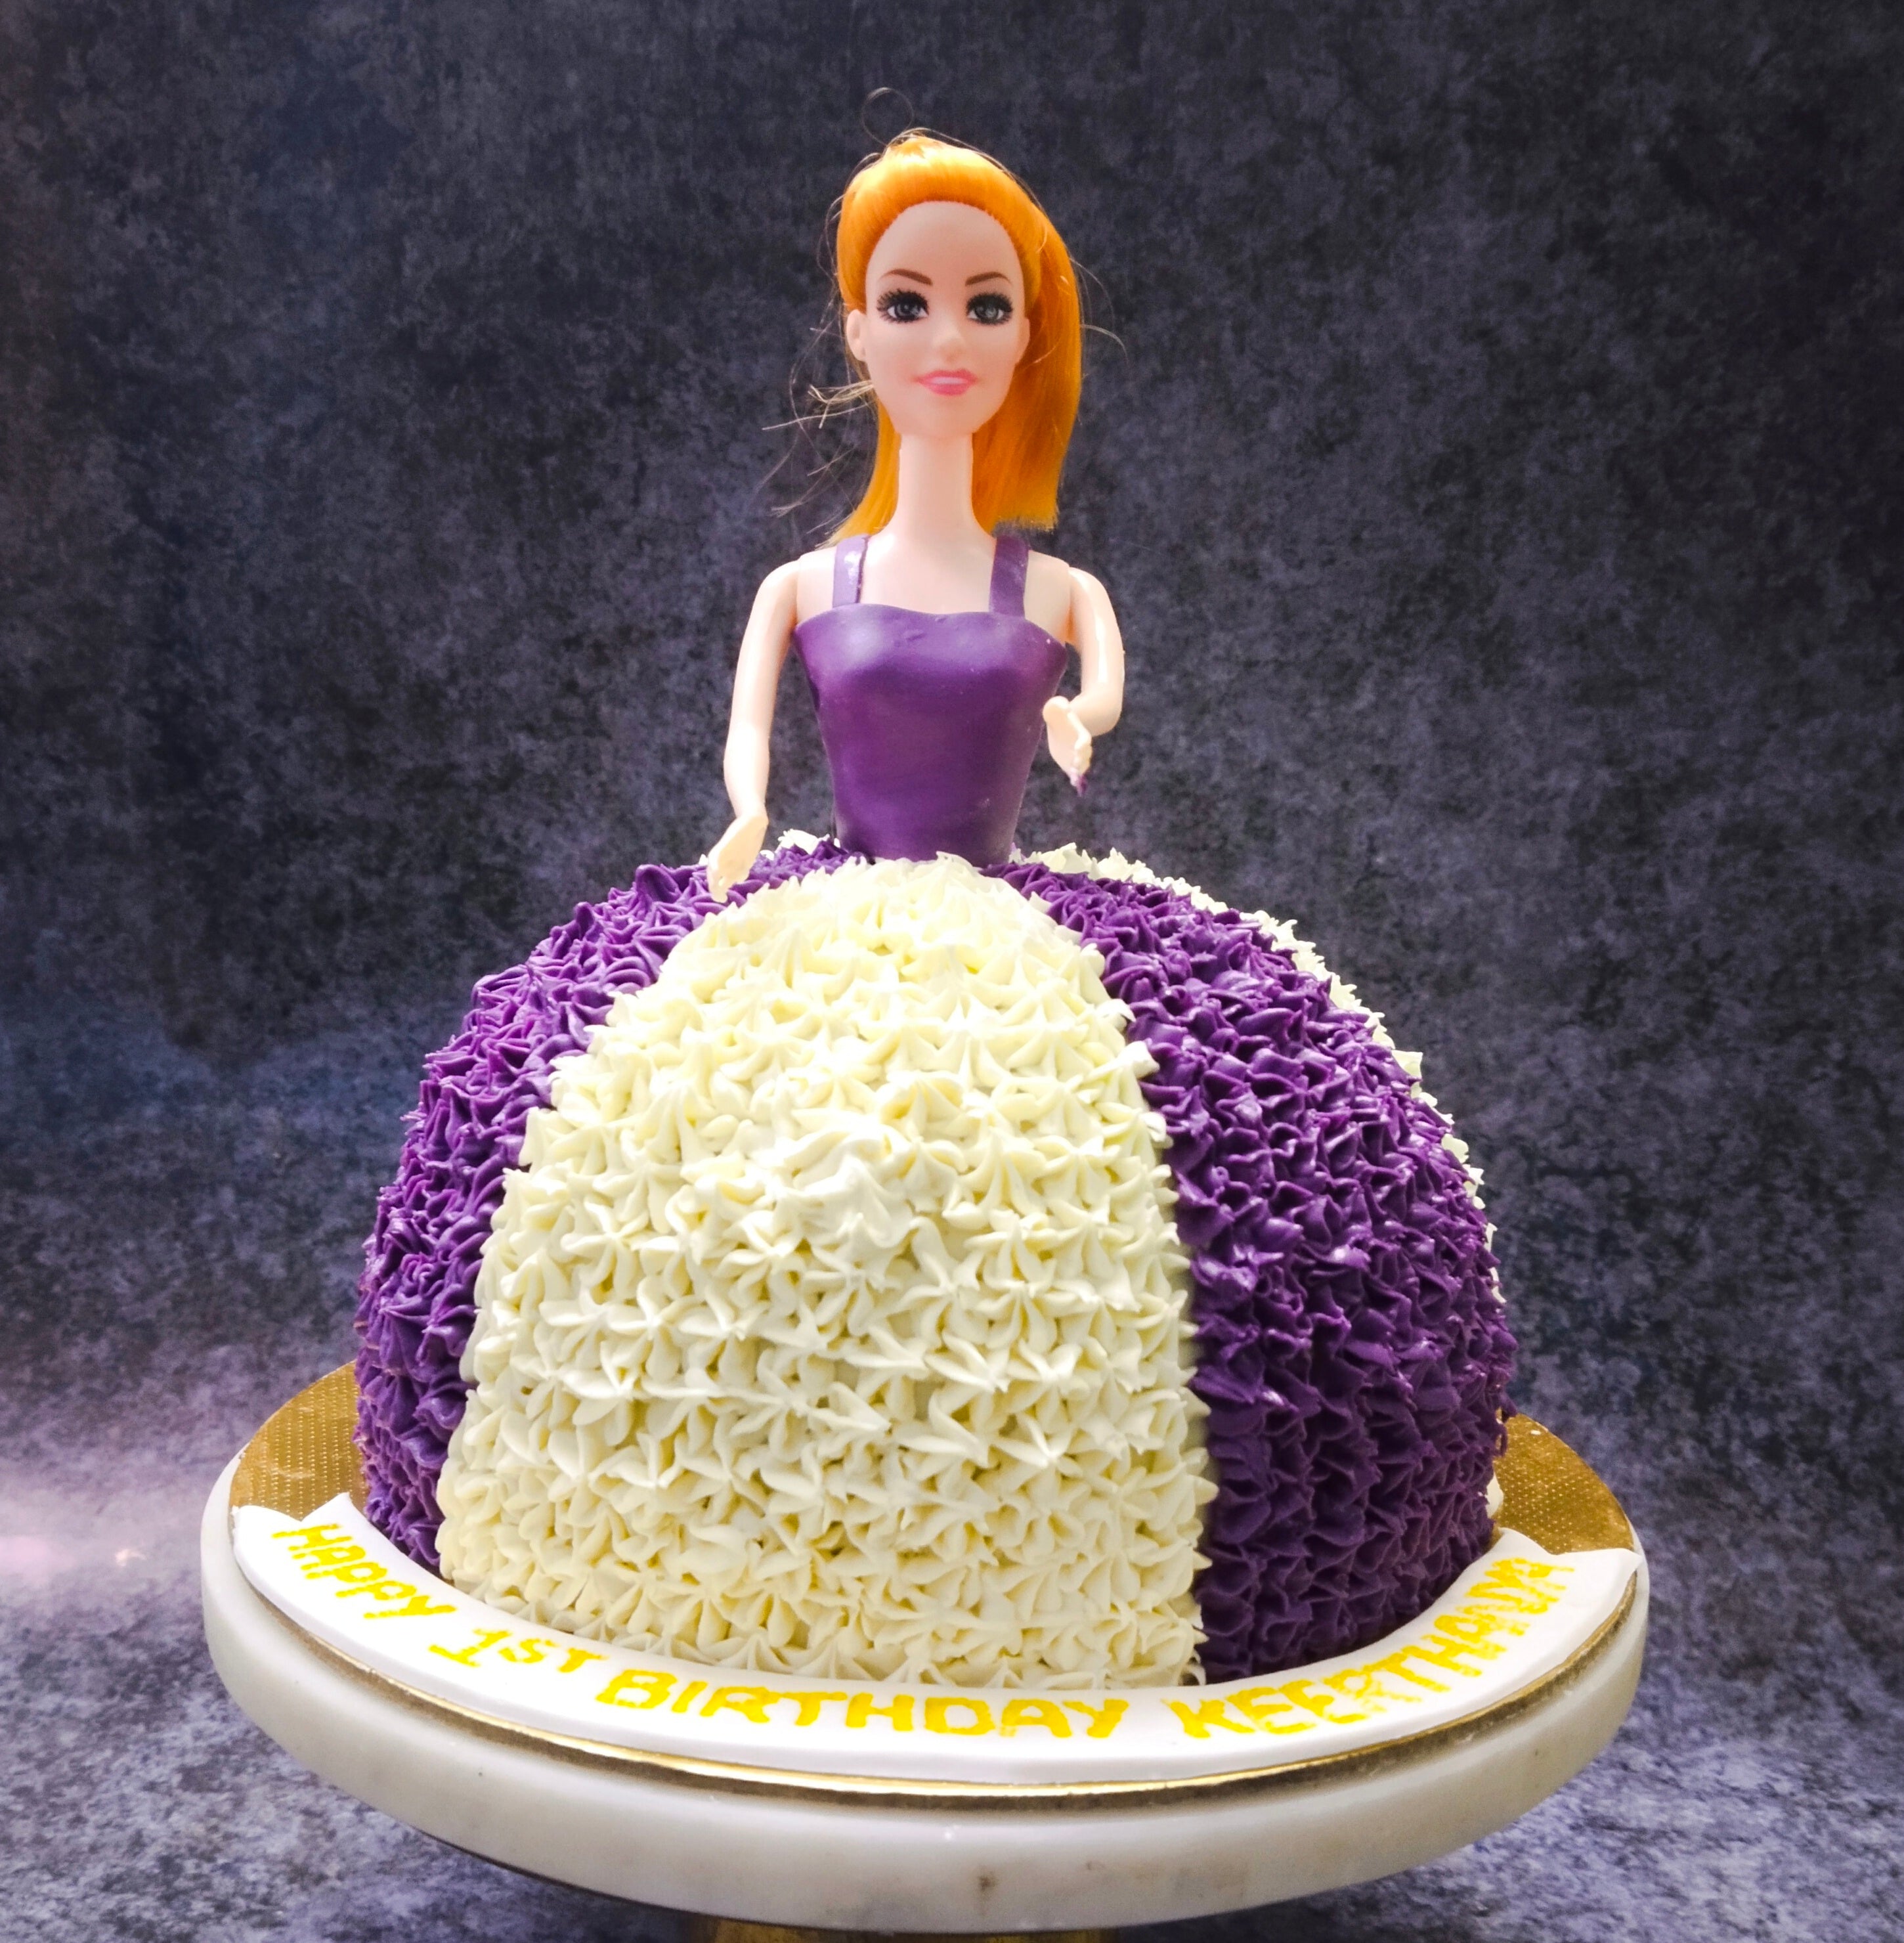 Doll Cake - 2.5Kg | OrderYourChoice